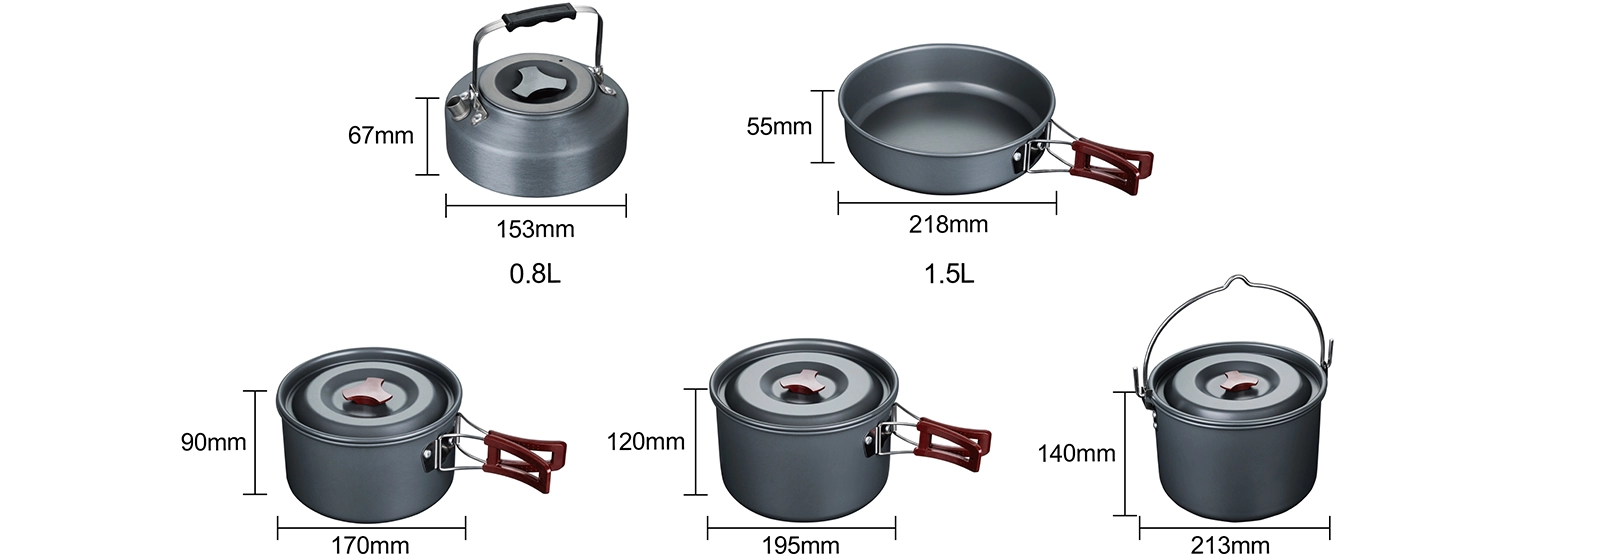 details of Folding Cookware for Family Camping